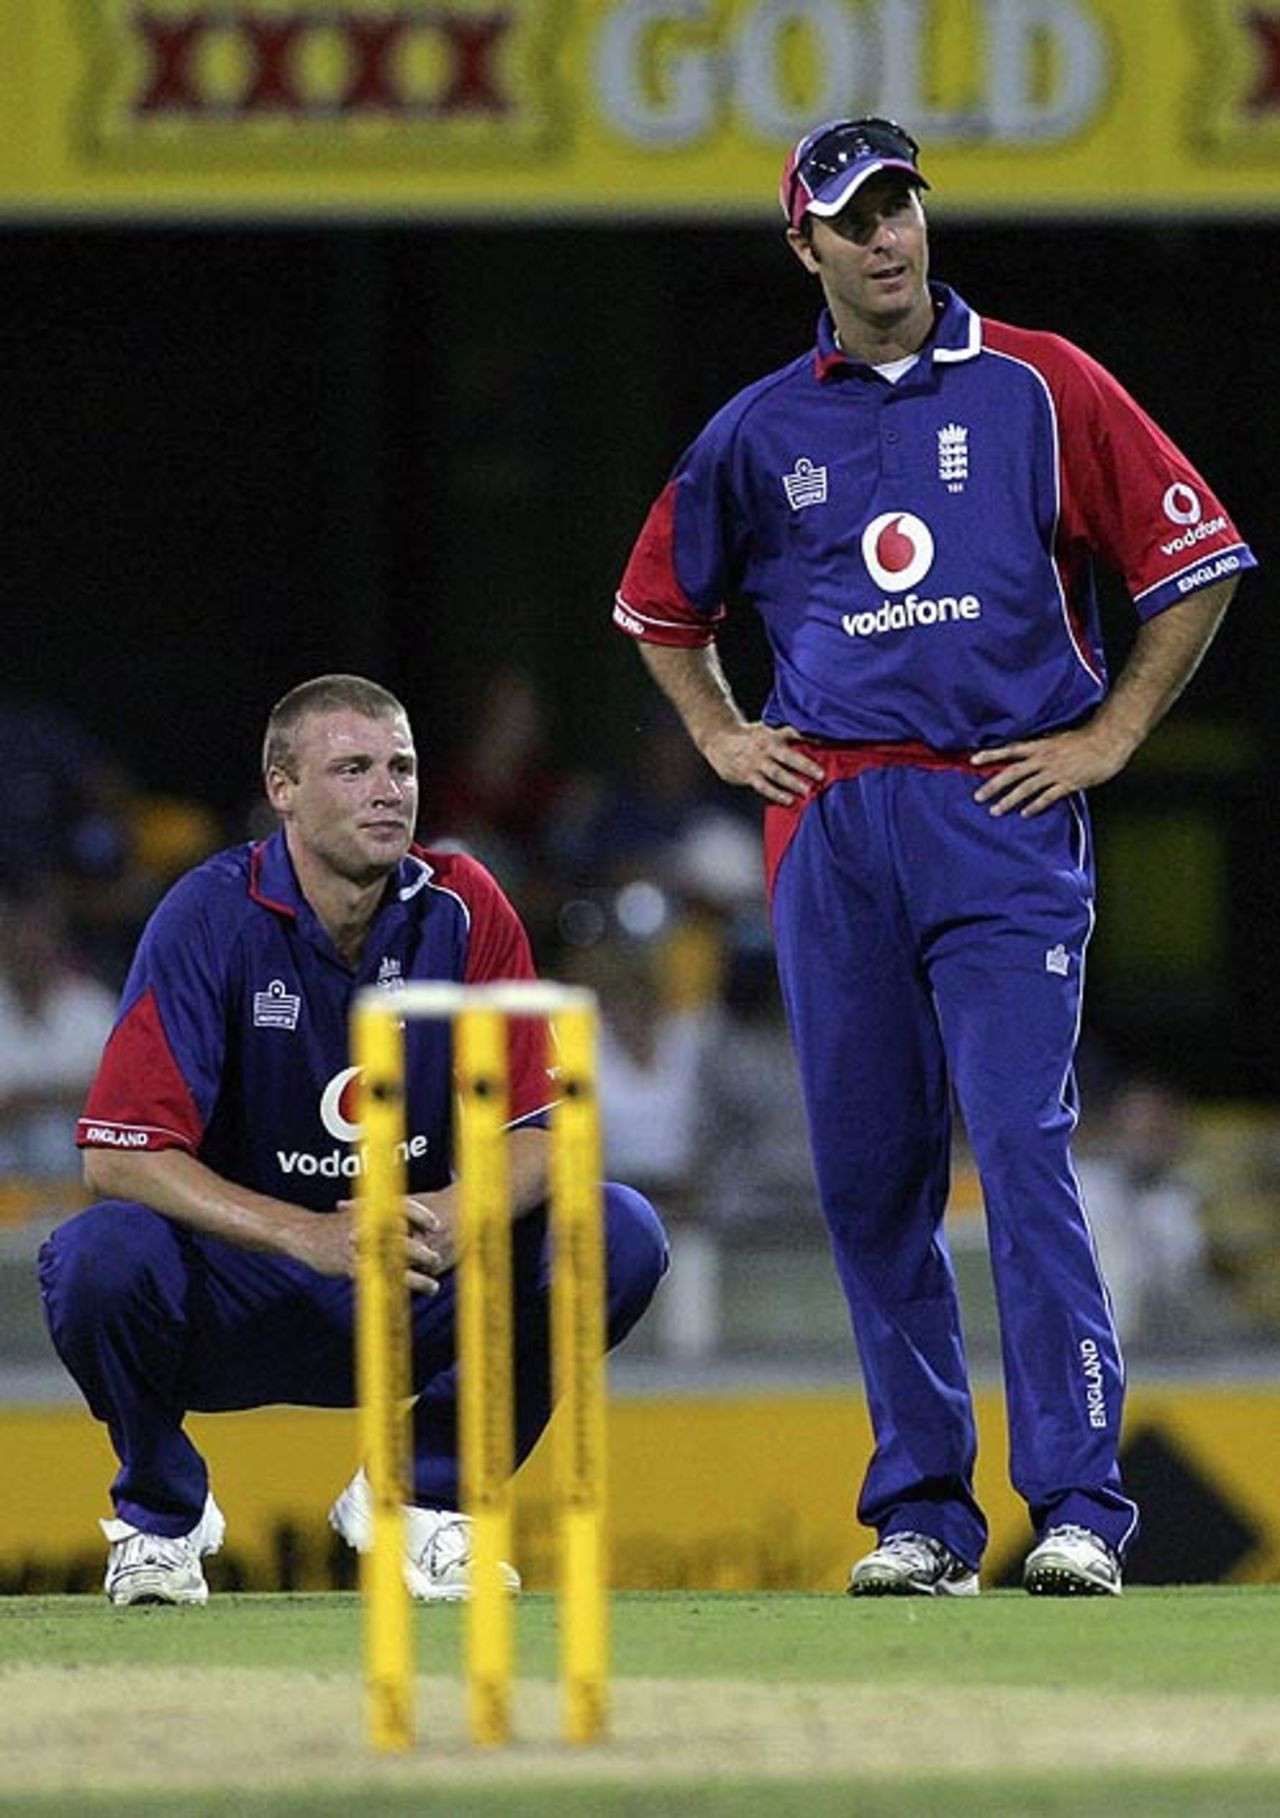 Michael Vaughan and Andrew Flintoff discuss options as England toil in the early stages of New Zealand's innings, England v New Zealand, CB Series, 12th match, Brisbane, February 6, 2007